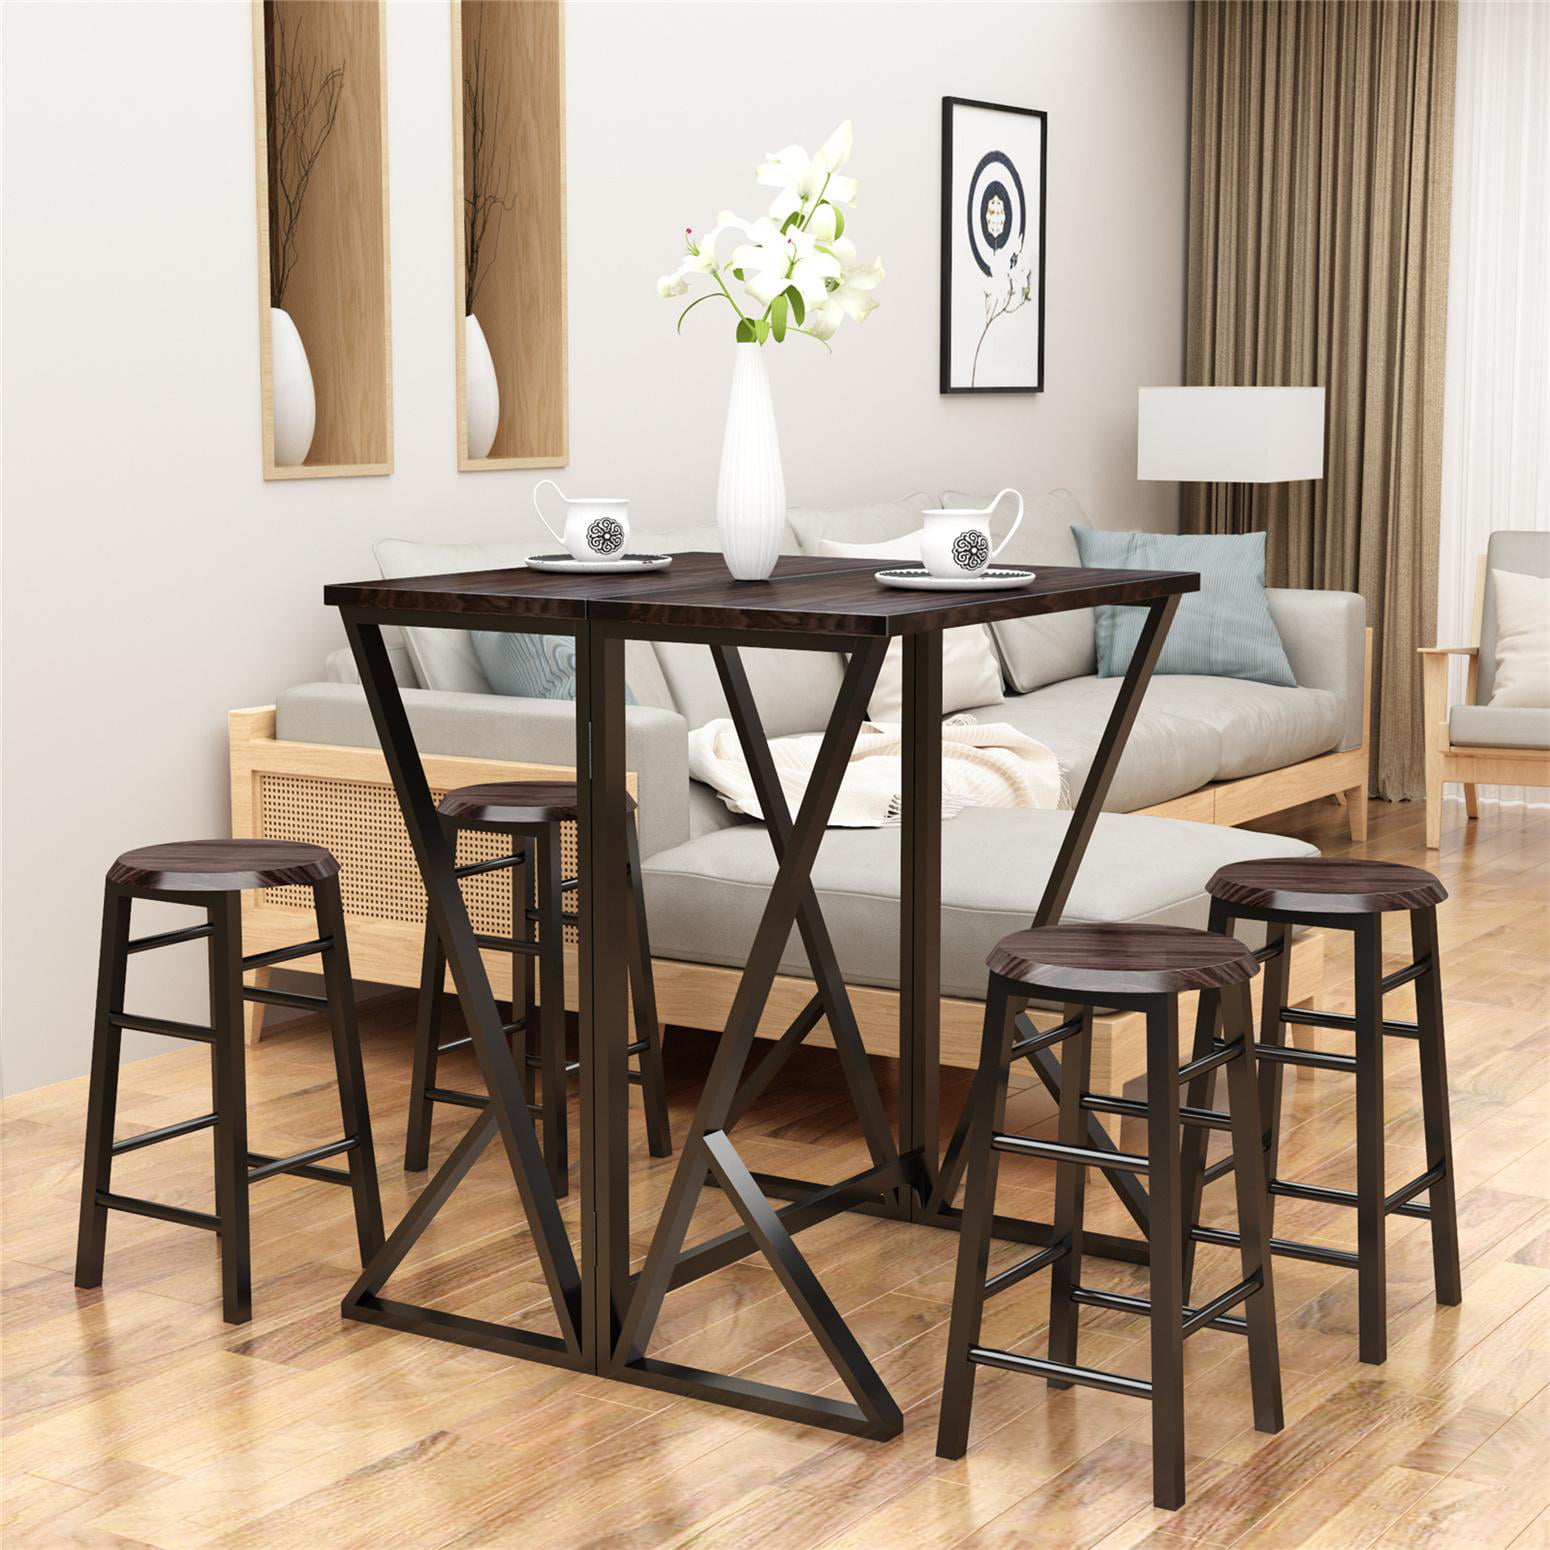 Folding Drop leaf Butterfly Dining Set with Table 4 Chairs Kitchen Furniture New